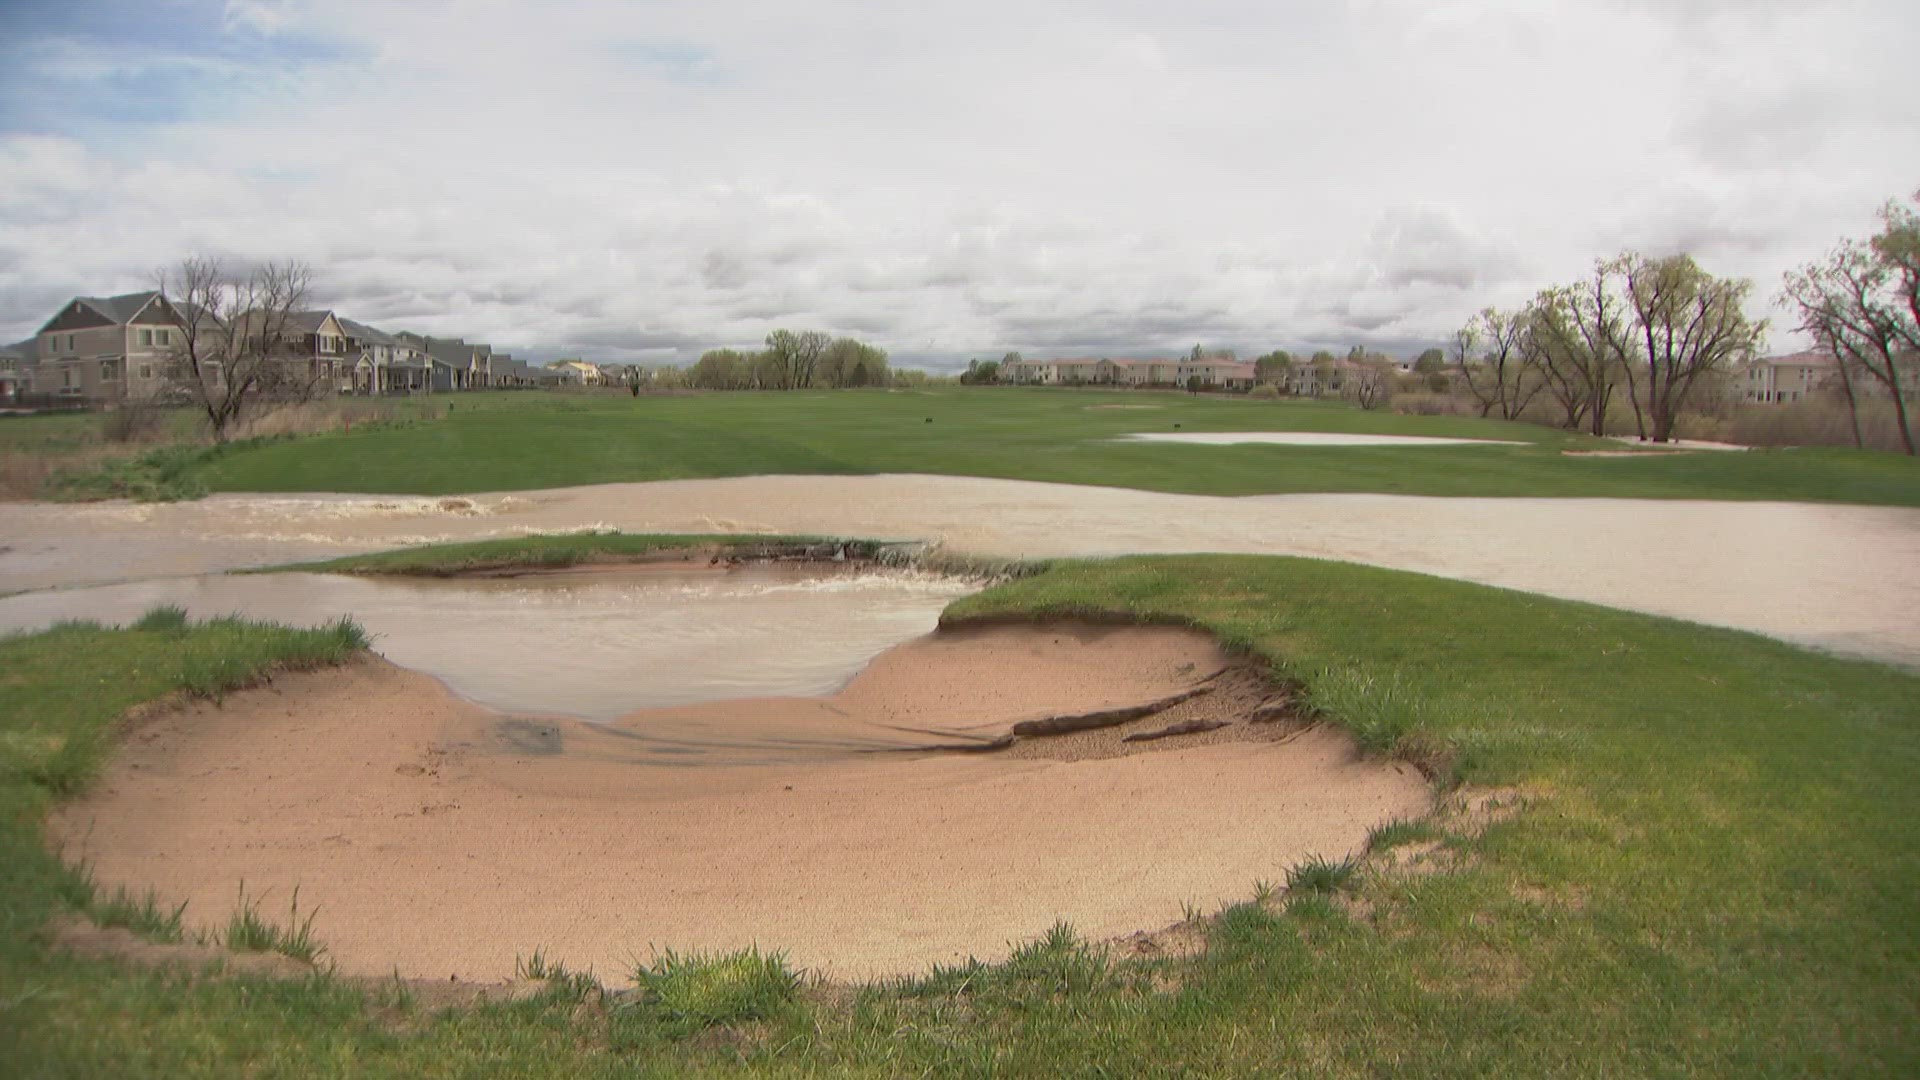 Katie Eastman joins us from northeast Denver where a golf course is unplayable- and homeowners have a new view.